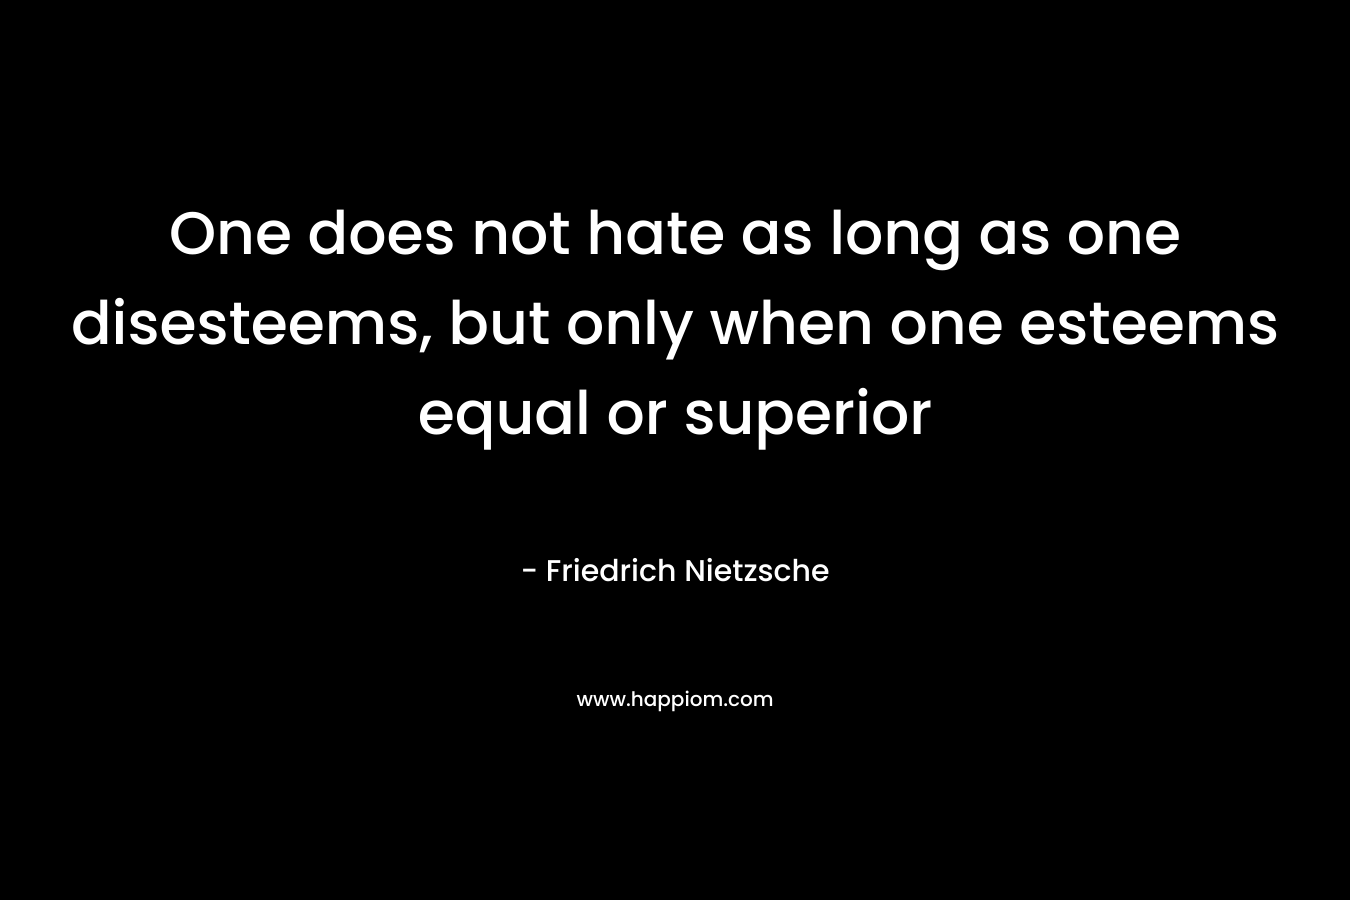 One does not hate as long as one disesteems, but only when one esteems equal or superior